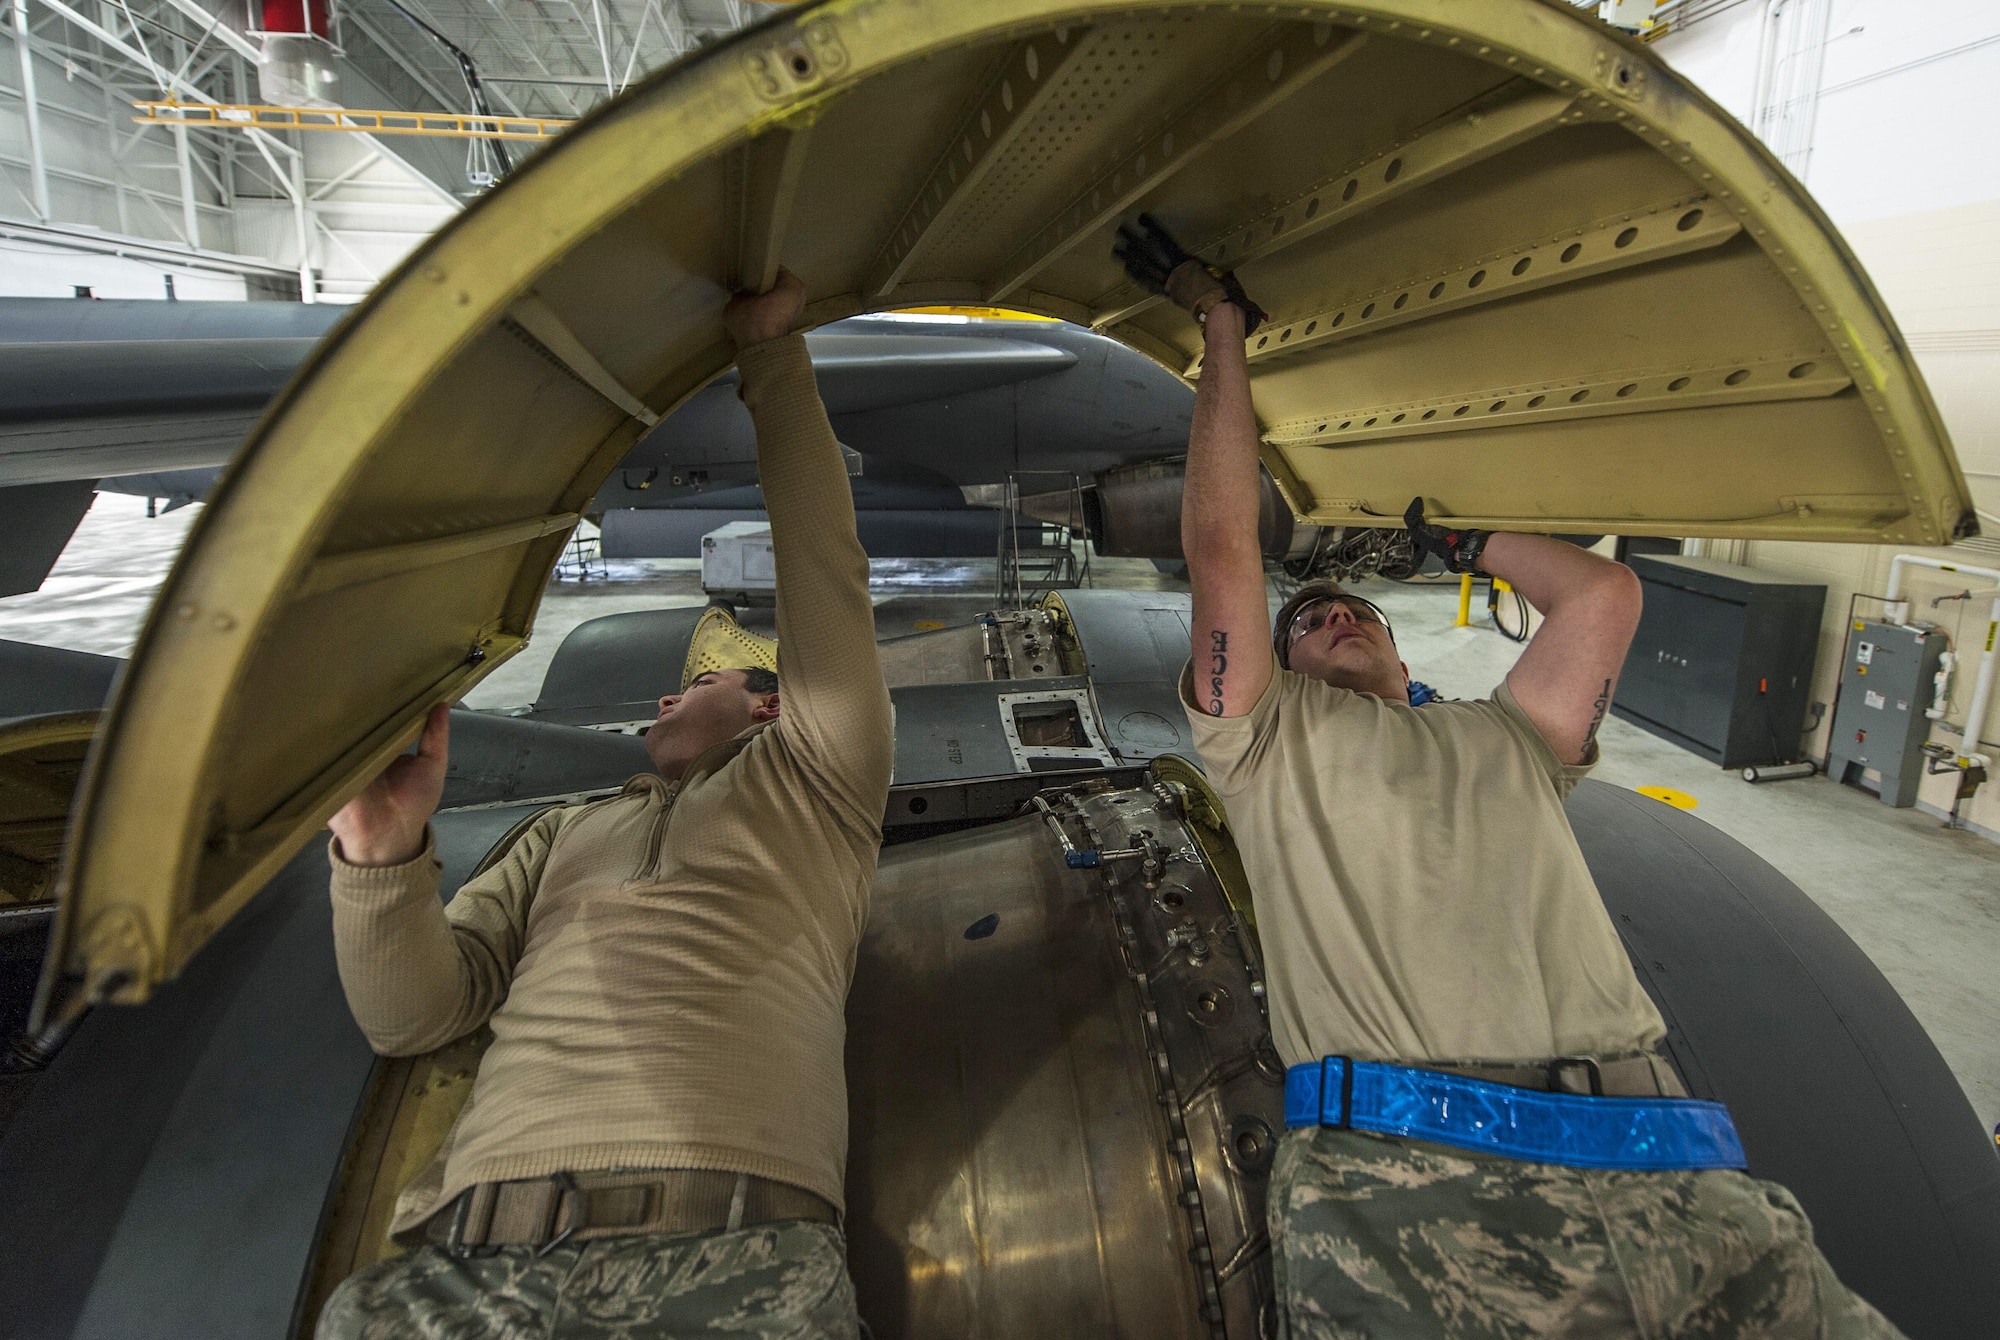 (From left) Senior Airman Allan Jungst and Staff Sgt. Alex Yount, 5th Maintenance Squadron crew chiefs, rotate an upper wrap cowling at Minot Air Force Base, N.D., March 20, 2017. During a phase inspection for 18 consecutive days, these maintainers wash, lubricate, inspect and fix all identified discrepancies on the B-52H Stratofortress. (U.S. Air Force photo/Airman 1st Class Jonathan McElderry)